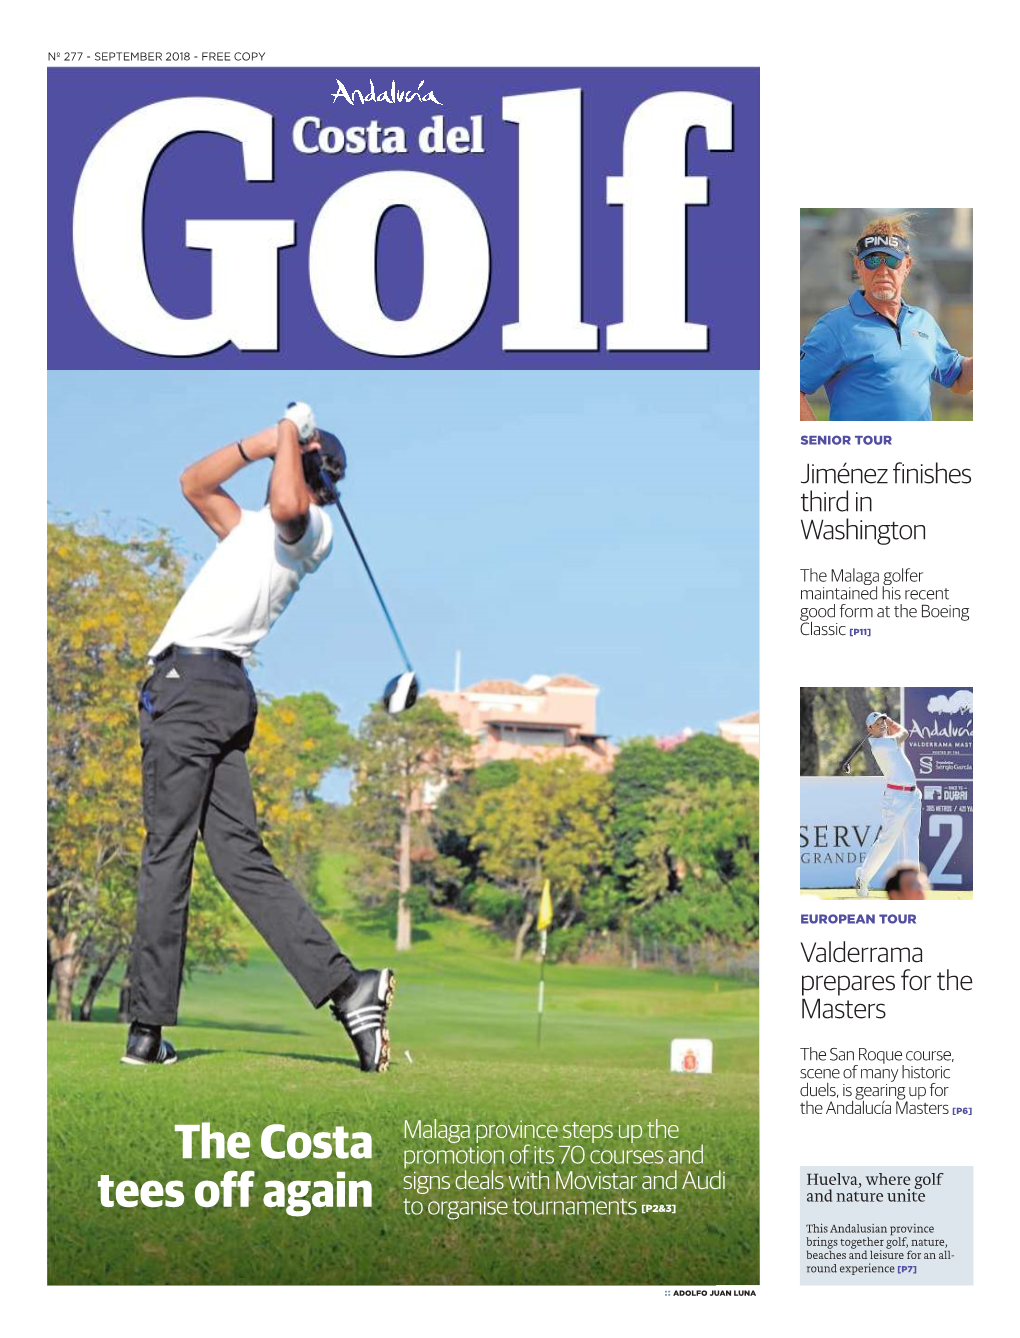 The Costa Tees Off Again